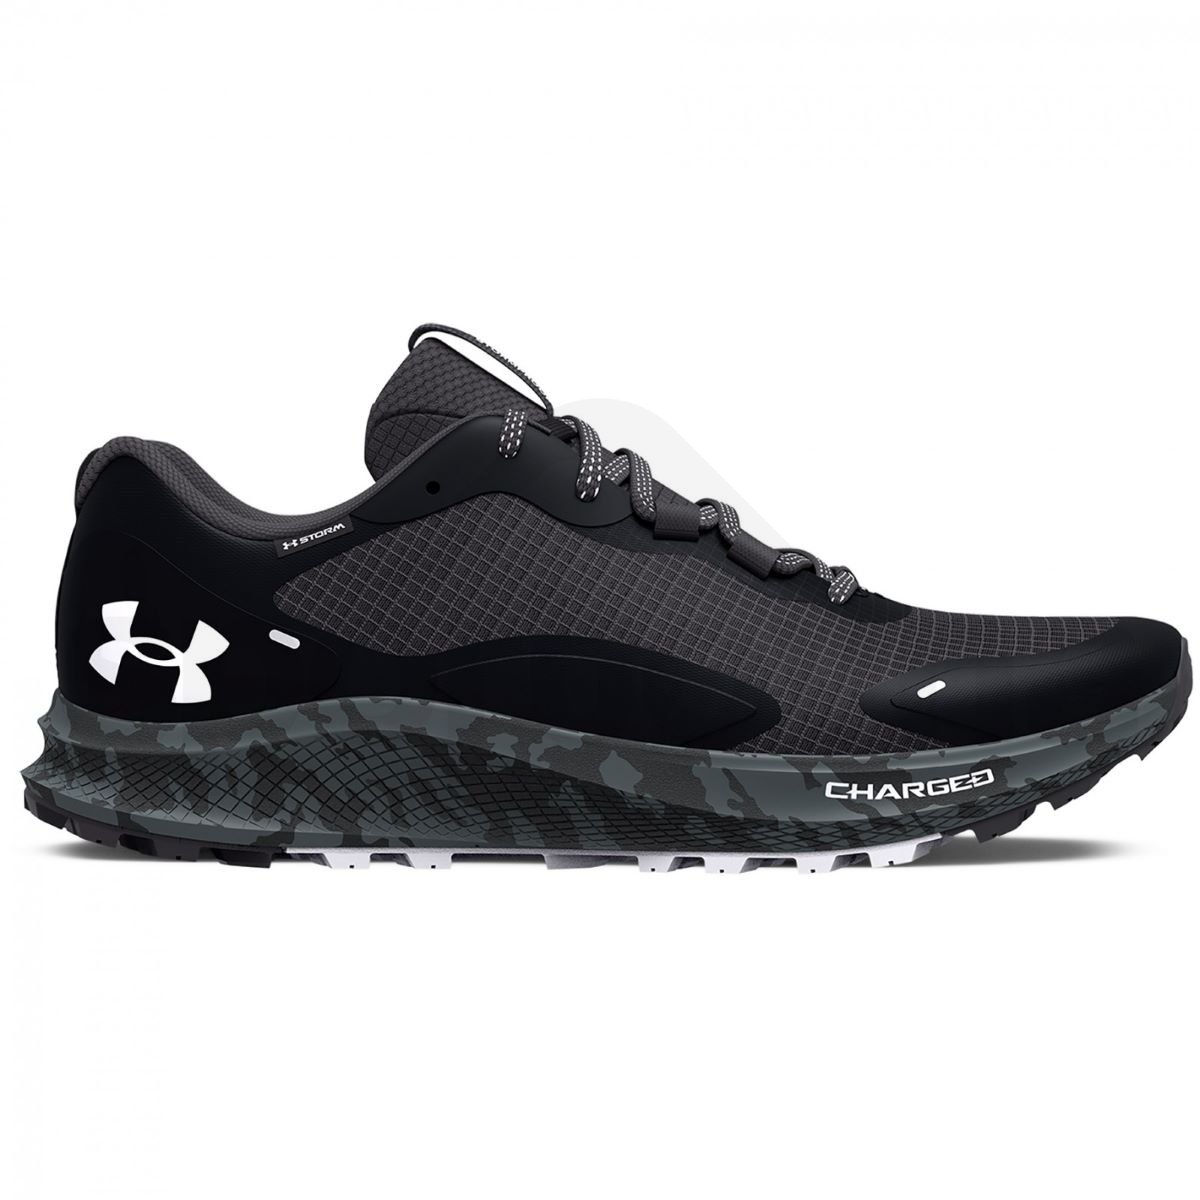 Under Armour Charged Bandit TR 2 SP W 3024763-002 - black 1